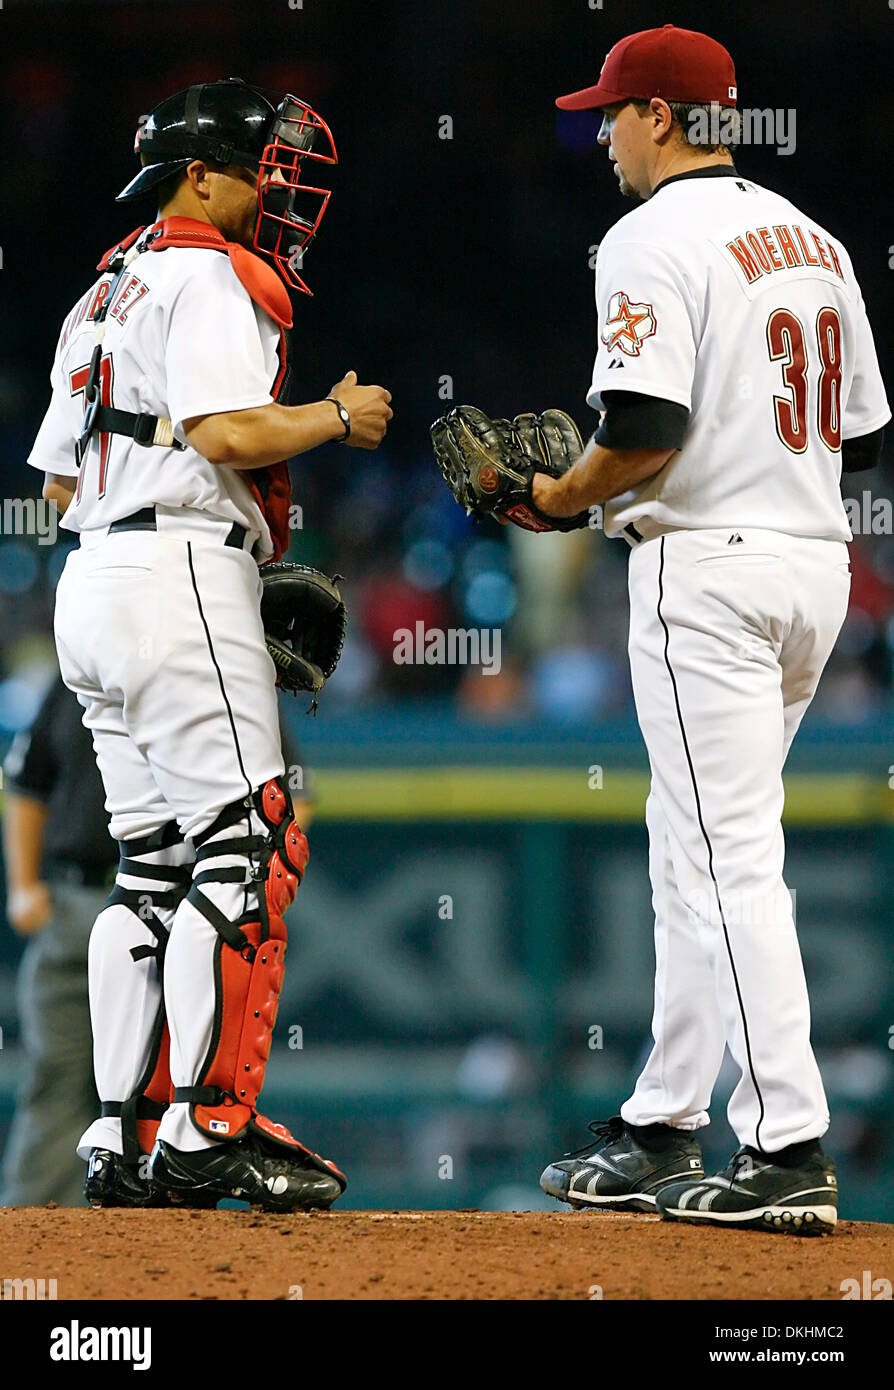 Aug. 5, 2009 - Houston, Texas, U.S - 05 August 2009: Houston pitcher Brian Moehler has a discussion with catcher Ivan Rodriguez atop the pitching mound as the Astros took on San Francisco at Minute Maid Park in Houston, TX. (Credit Image: © Southcreek Global/ZUMApress.com) Stock Photo